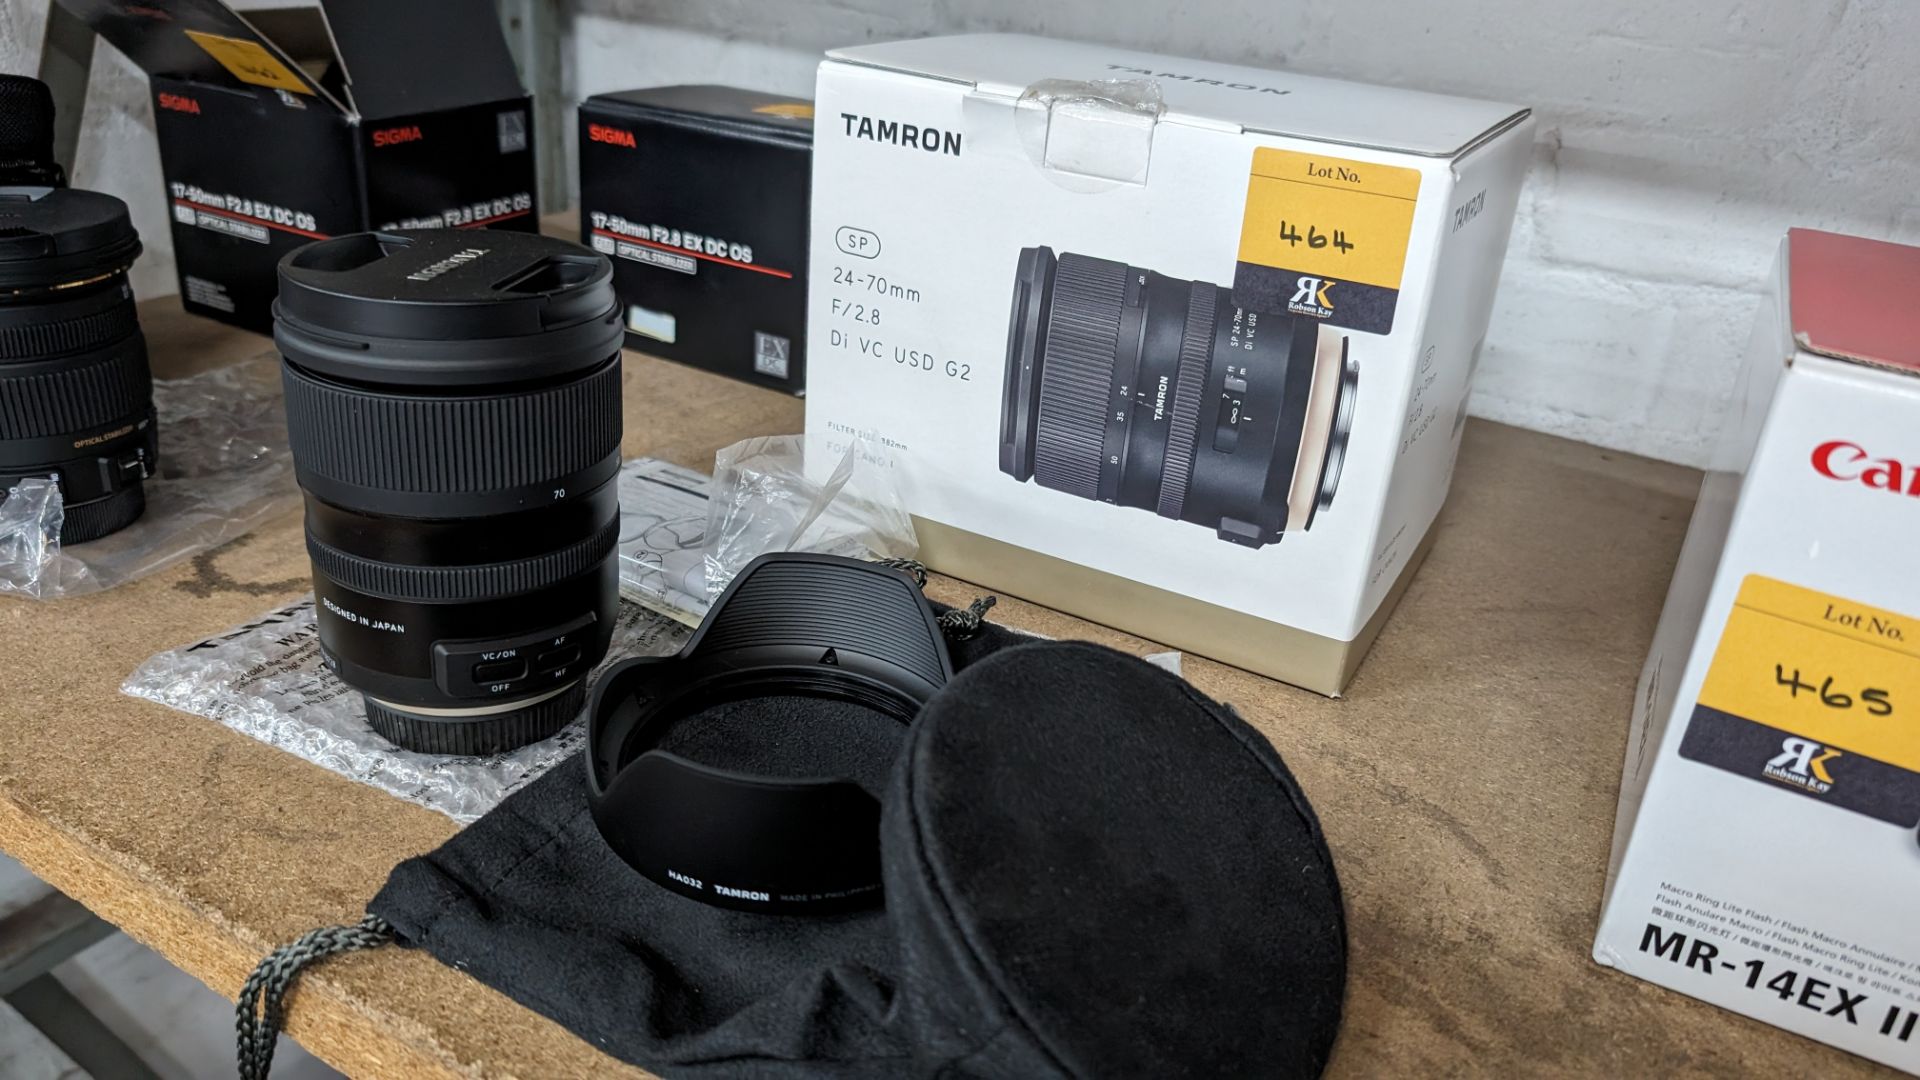 Tamron SP 24-70mm f/2.8 Di VC USD G2 lens, including soft carry case and attachment - Image 10 of 10